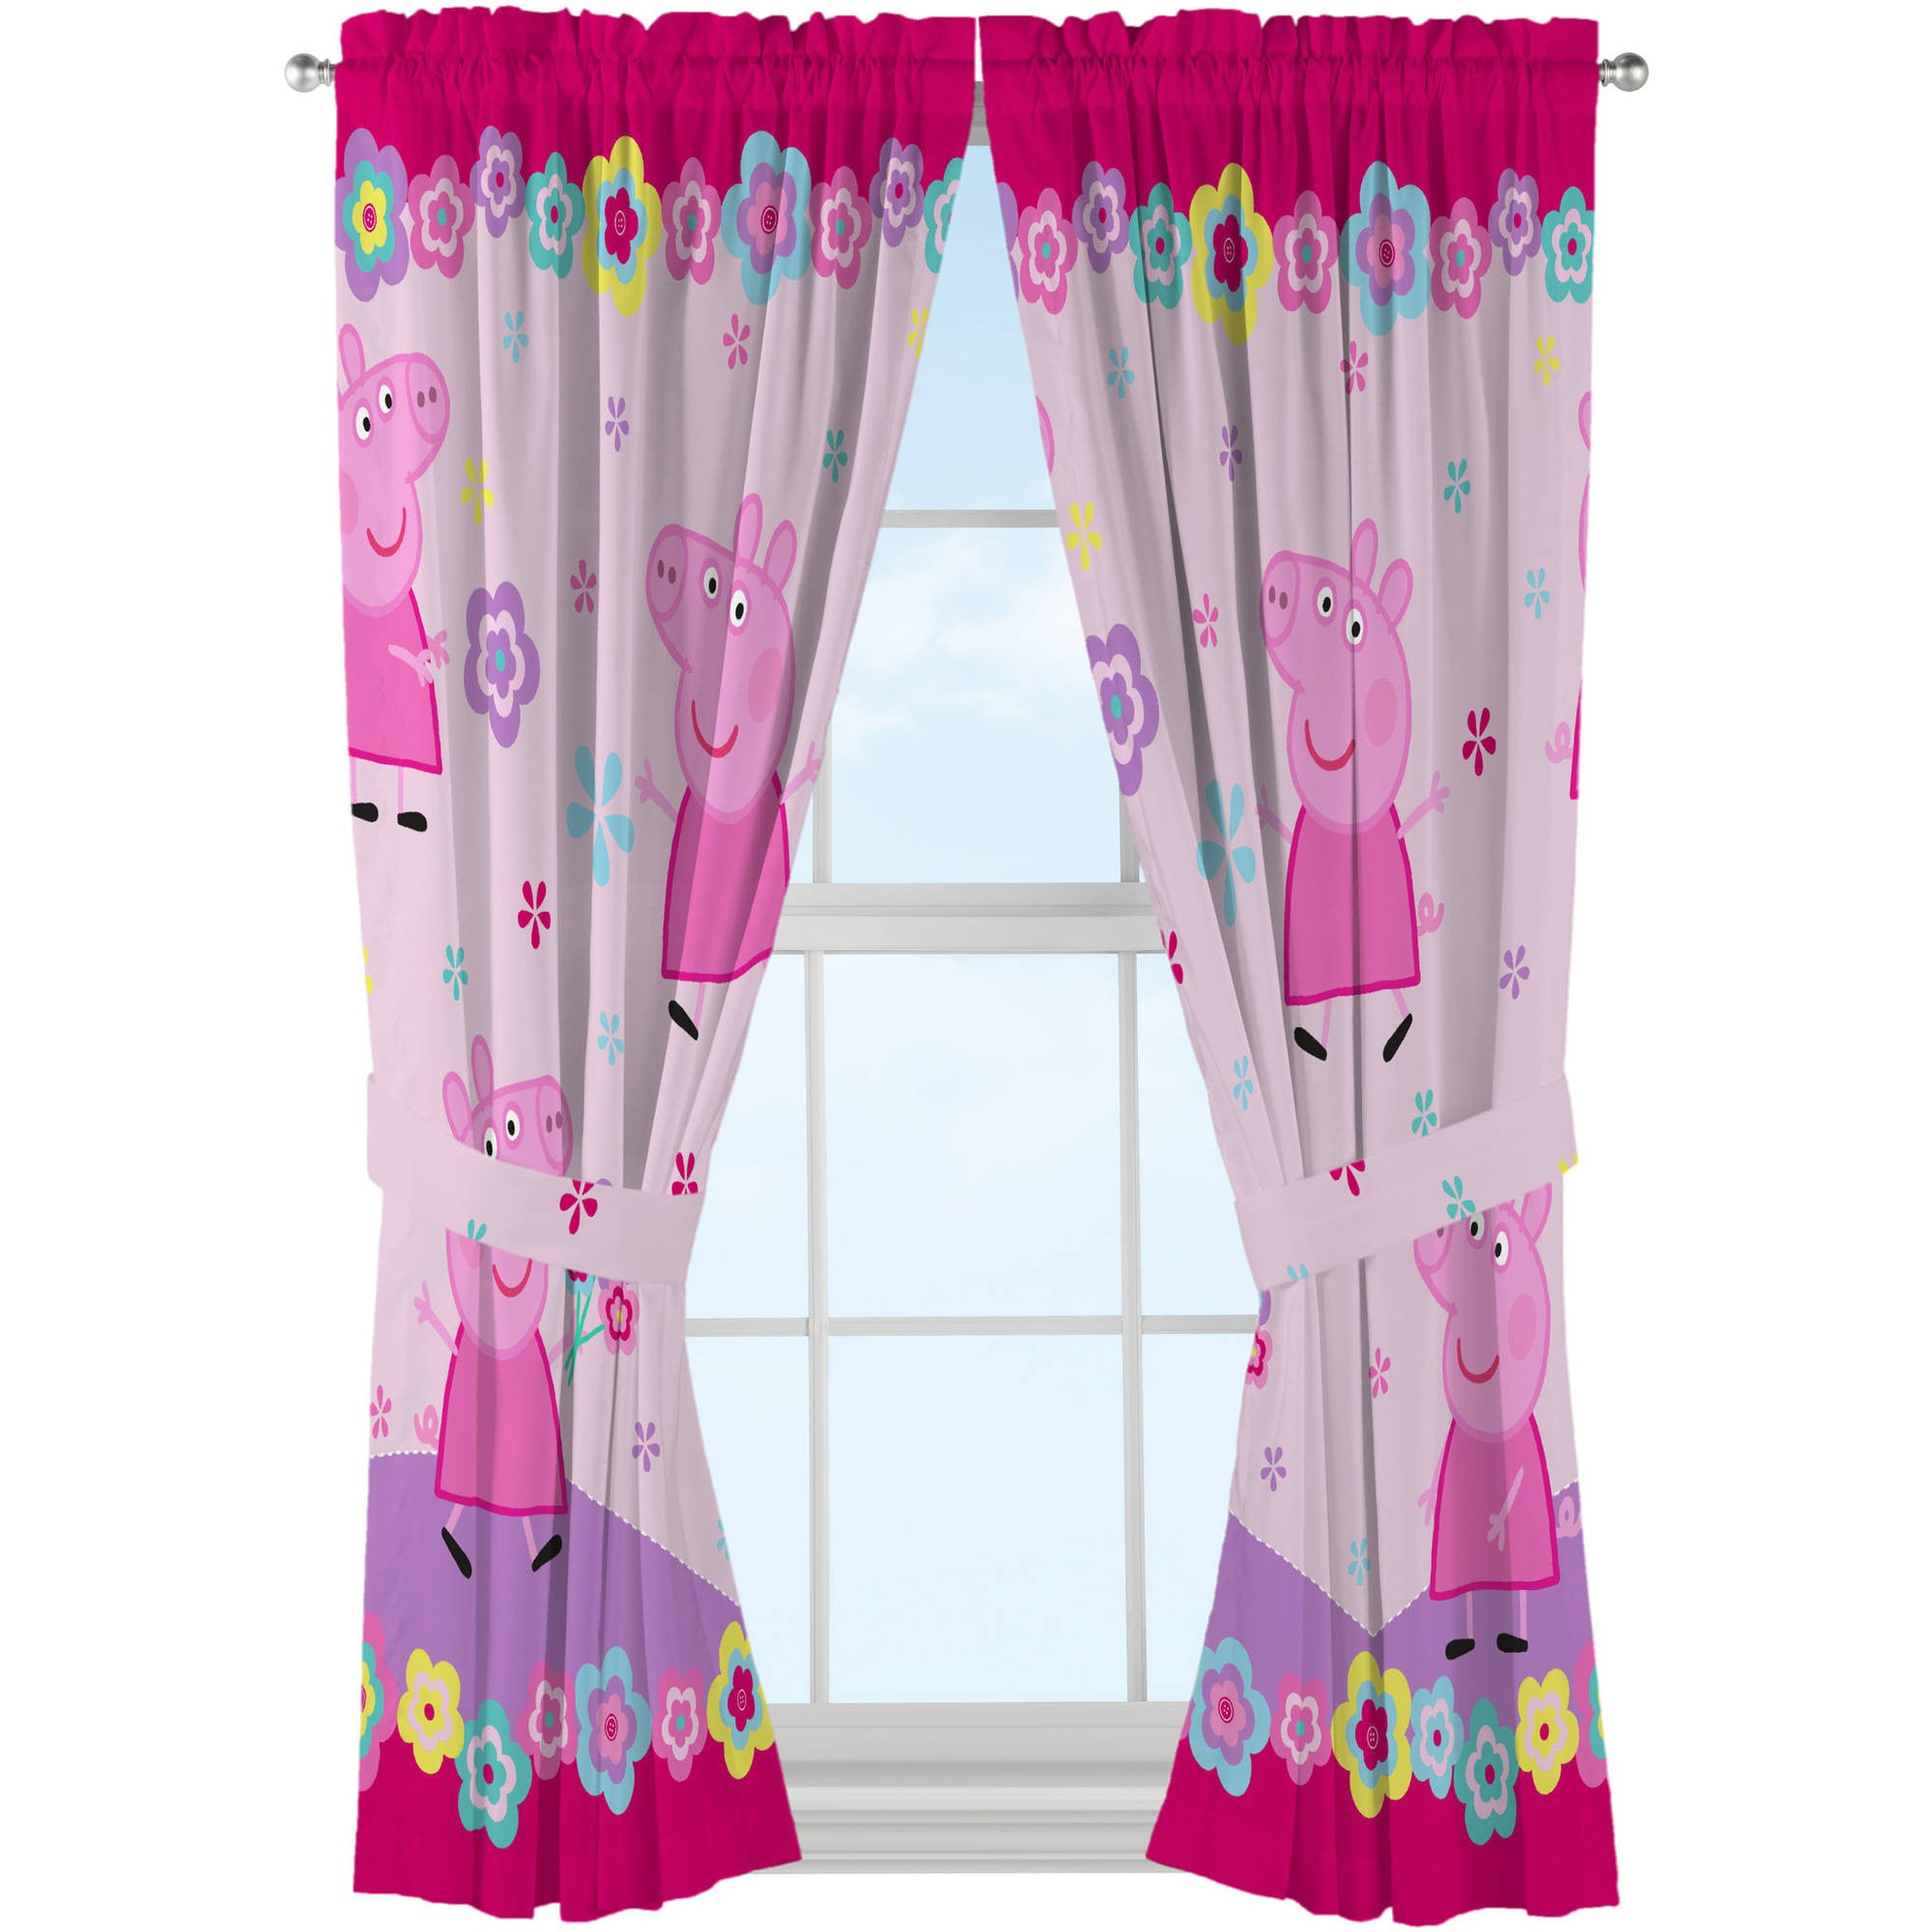 NEW PEPPA PIG 'HAPPY' PAIR OF CURTAINS GIRLS PINK LILAC BEDROOM 66 x 54 Inch 